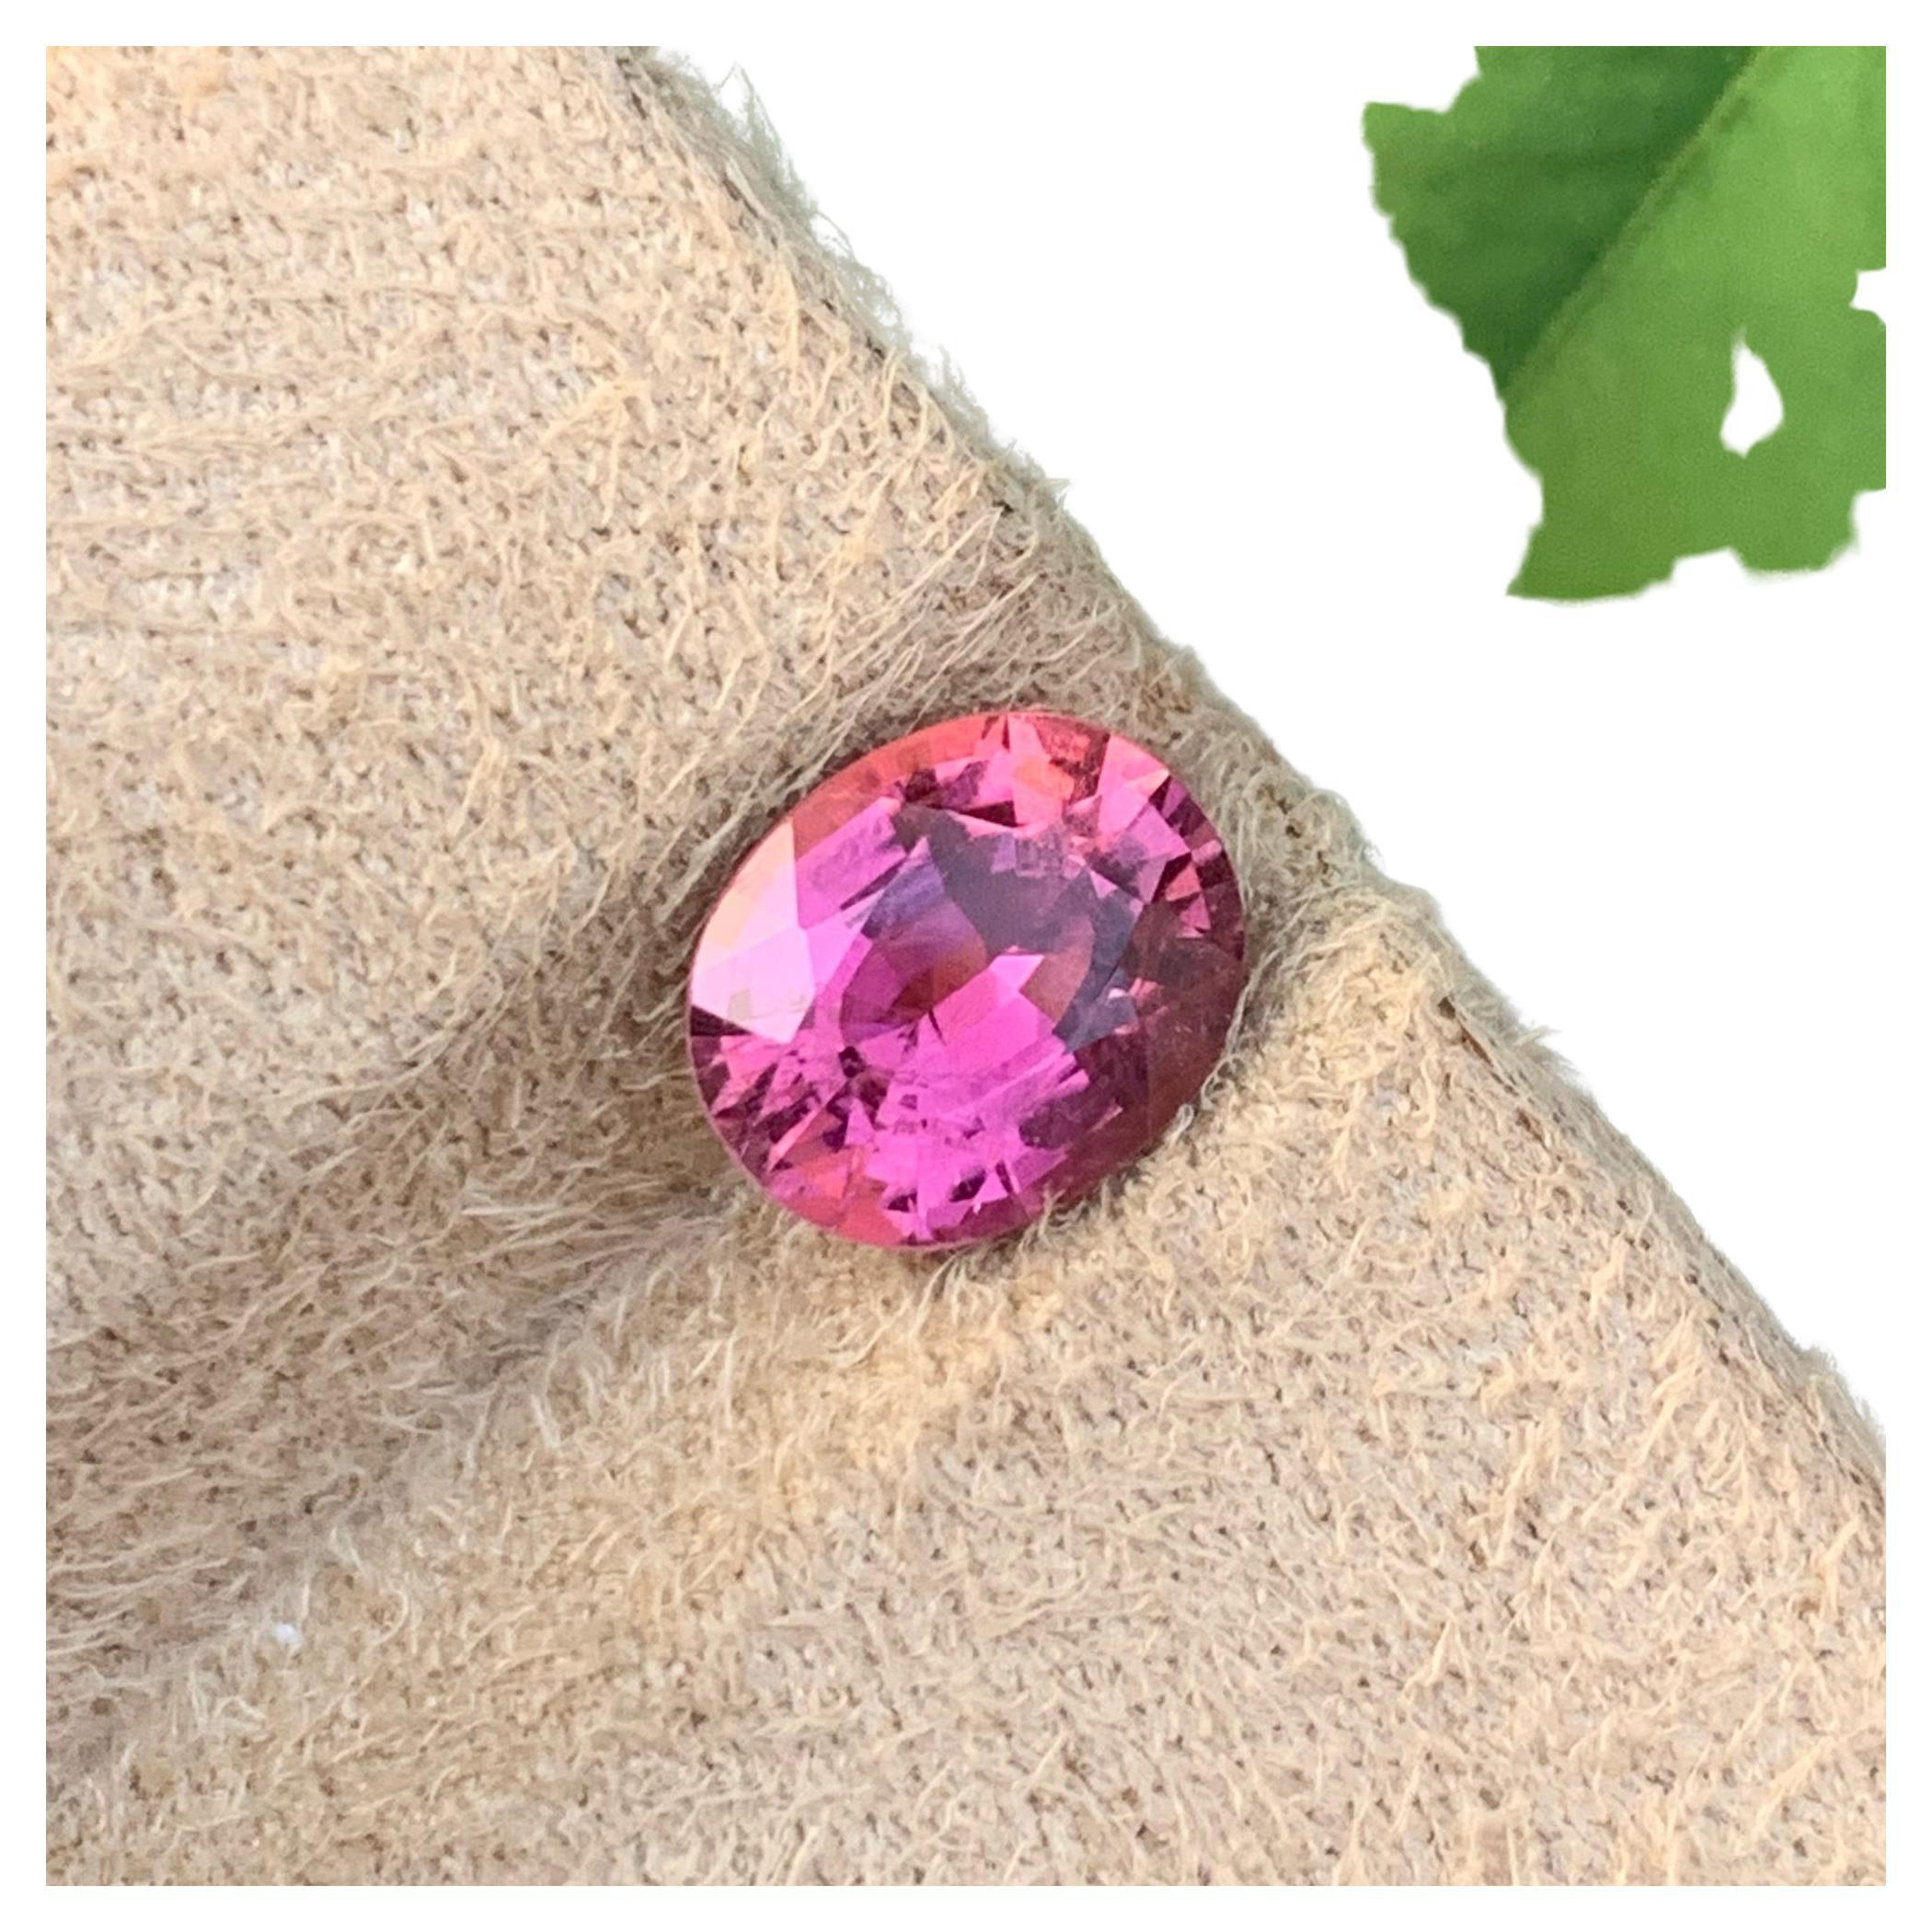 Natural Hot Pink Tourmaline Stone of 2.05 carats from Afghanistan has a wonderful cut in a Oval shape, incredible Pink Color. Great brilliance. This gem is  Eye Clean Clarity.

Product Information
GEMSTONE TYPE:	Natural Hot Pink Tourmaline